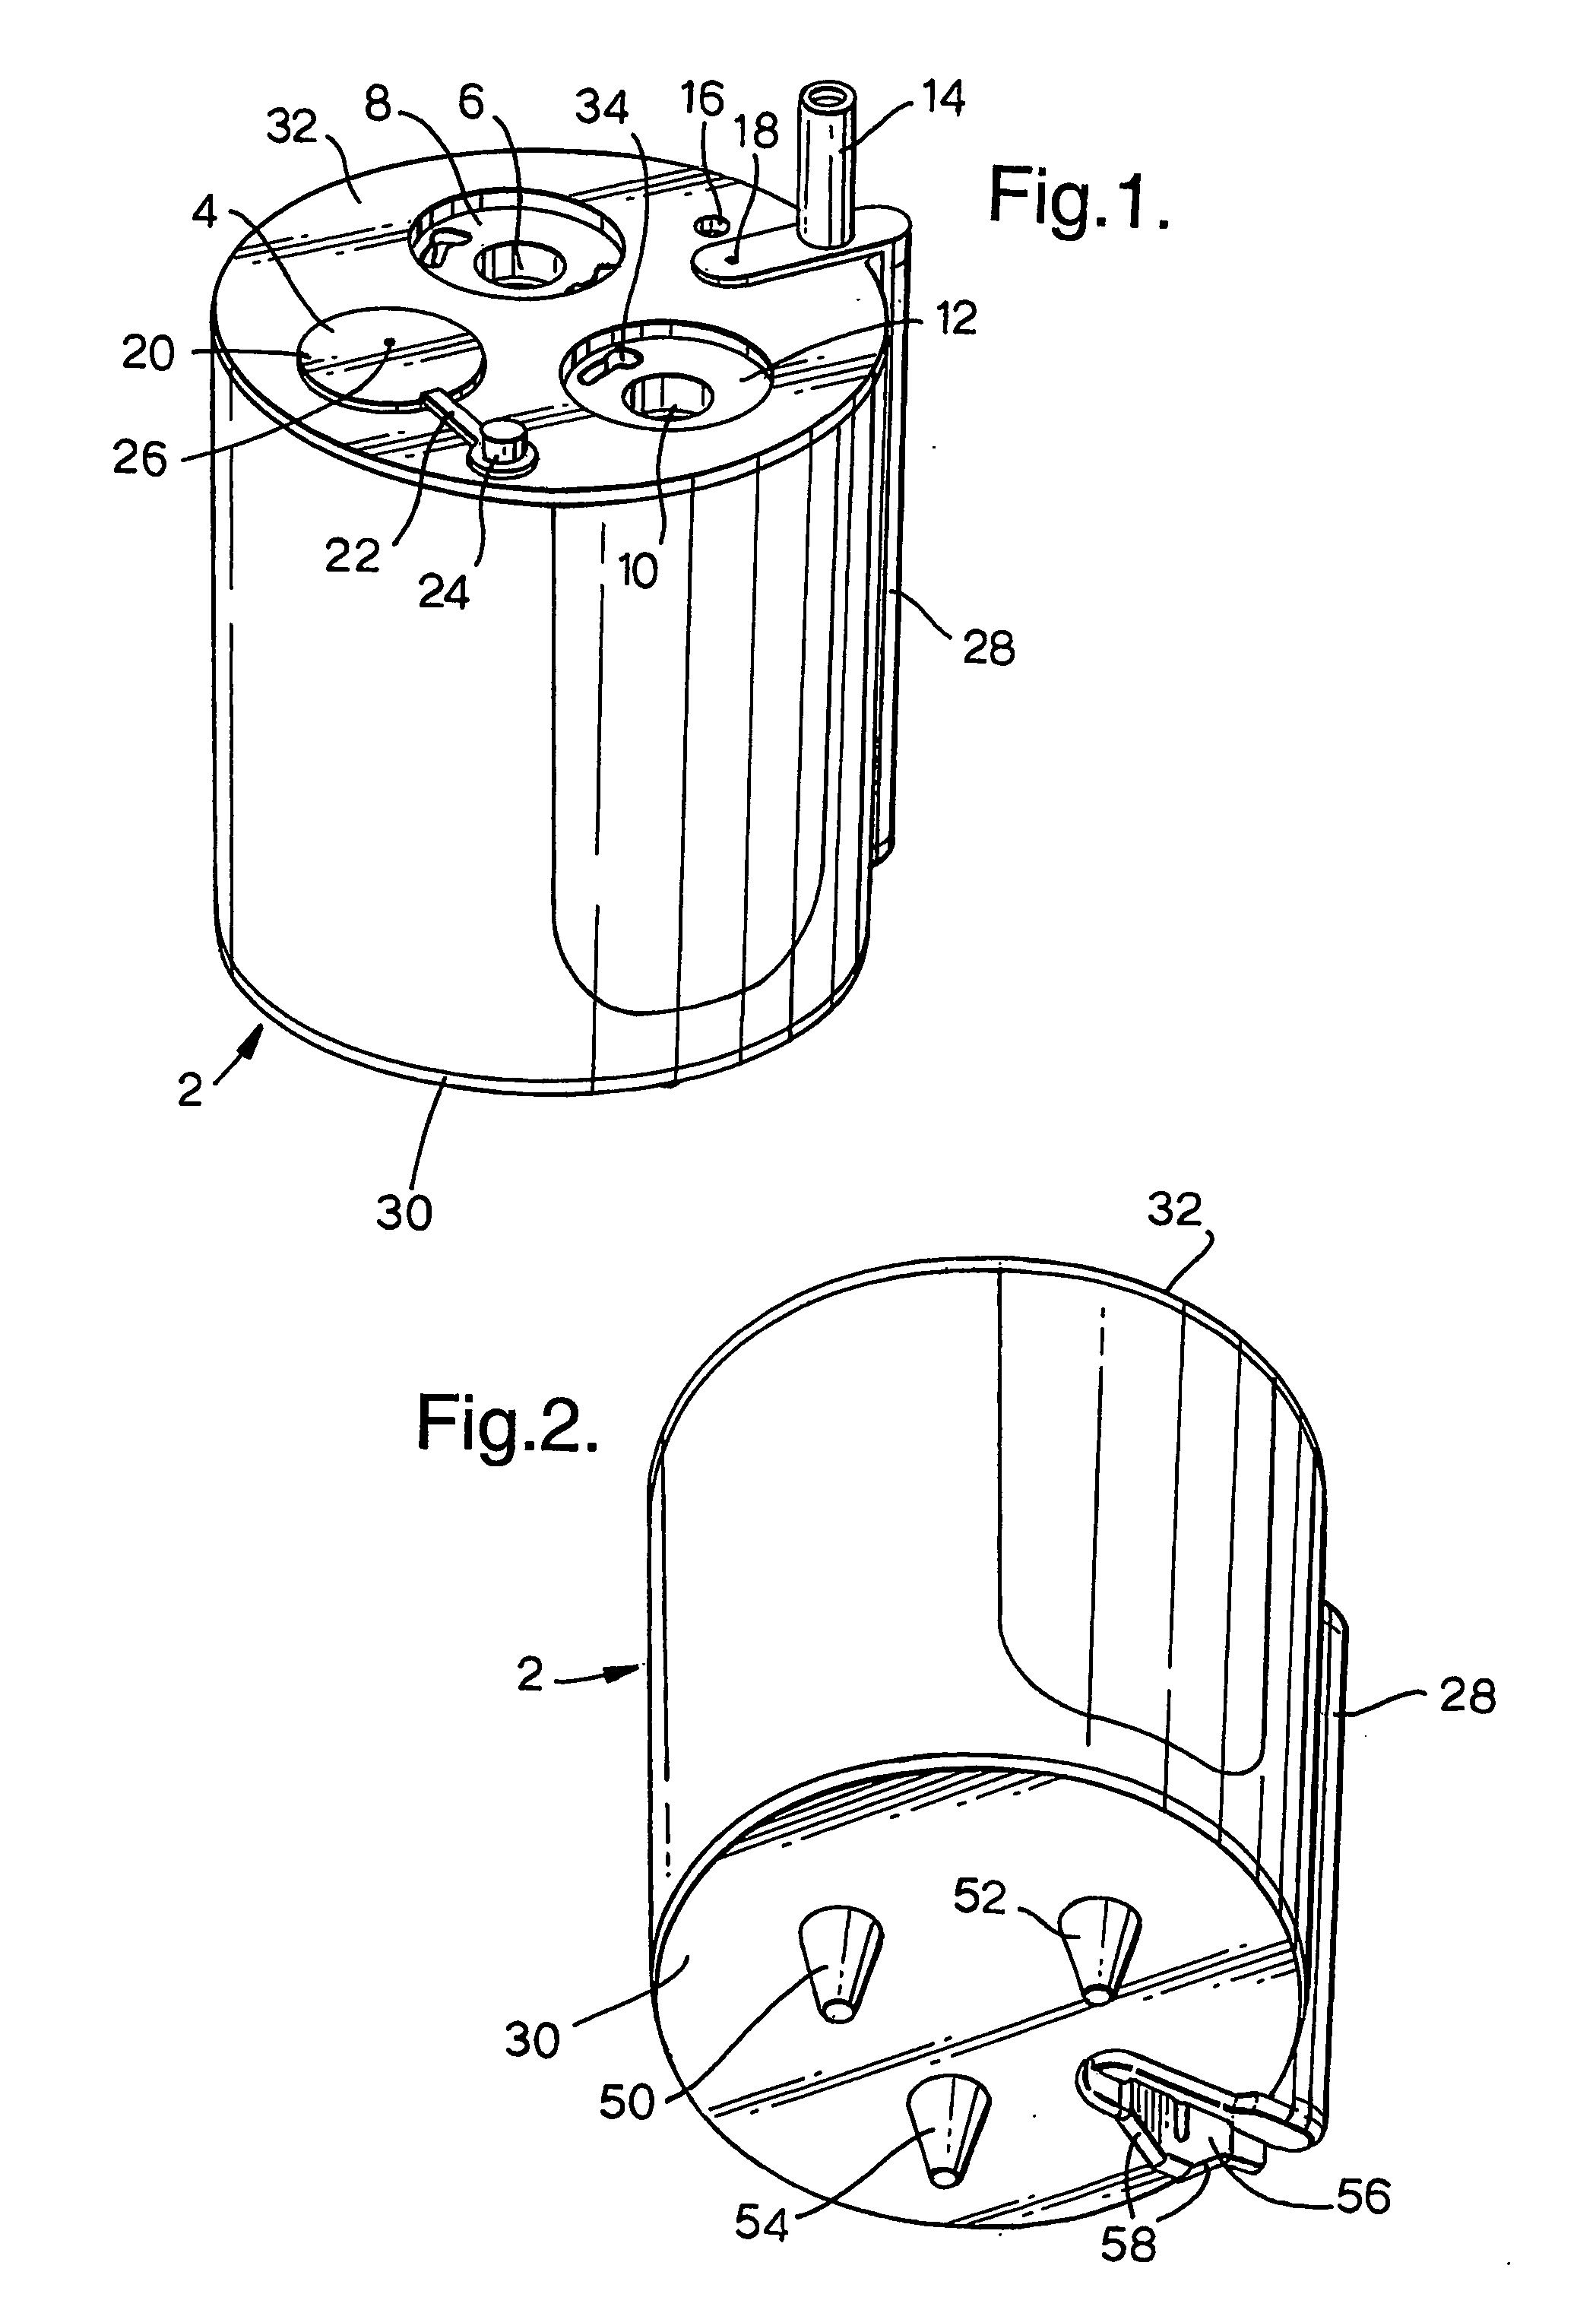 Apparatus for processing a fluid sample